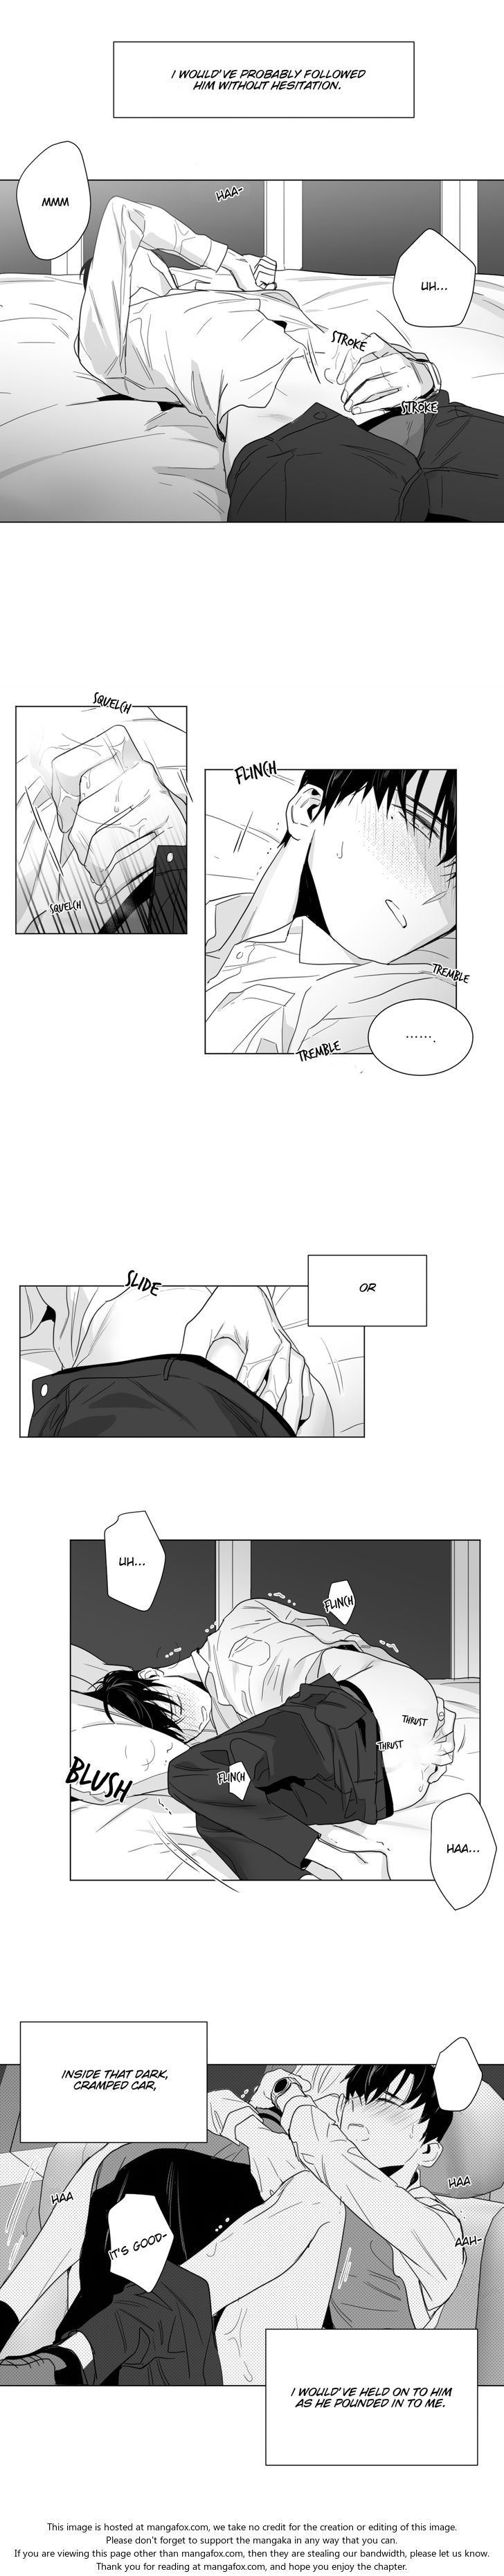 Lover Boy (Lezhin) Chapter 026 page 15